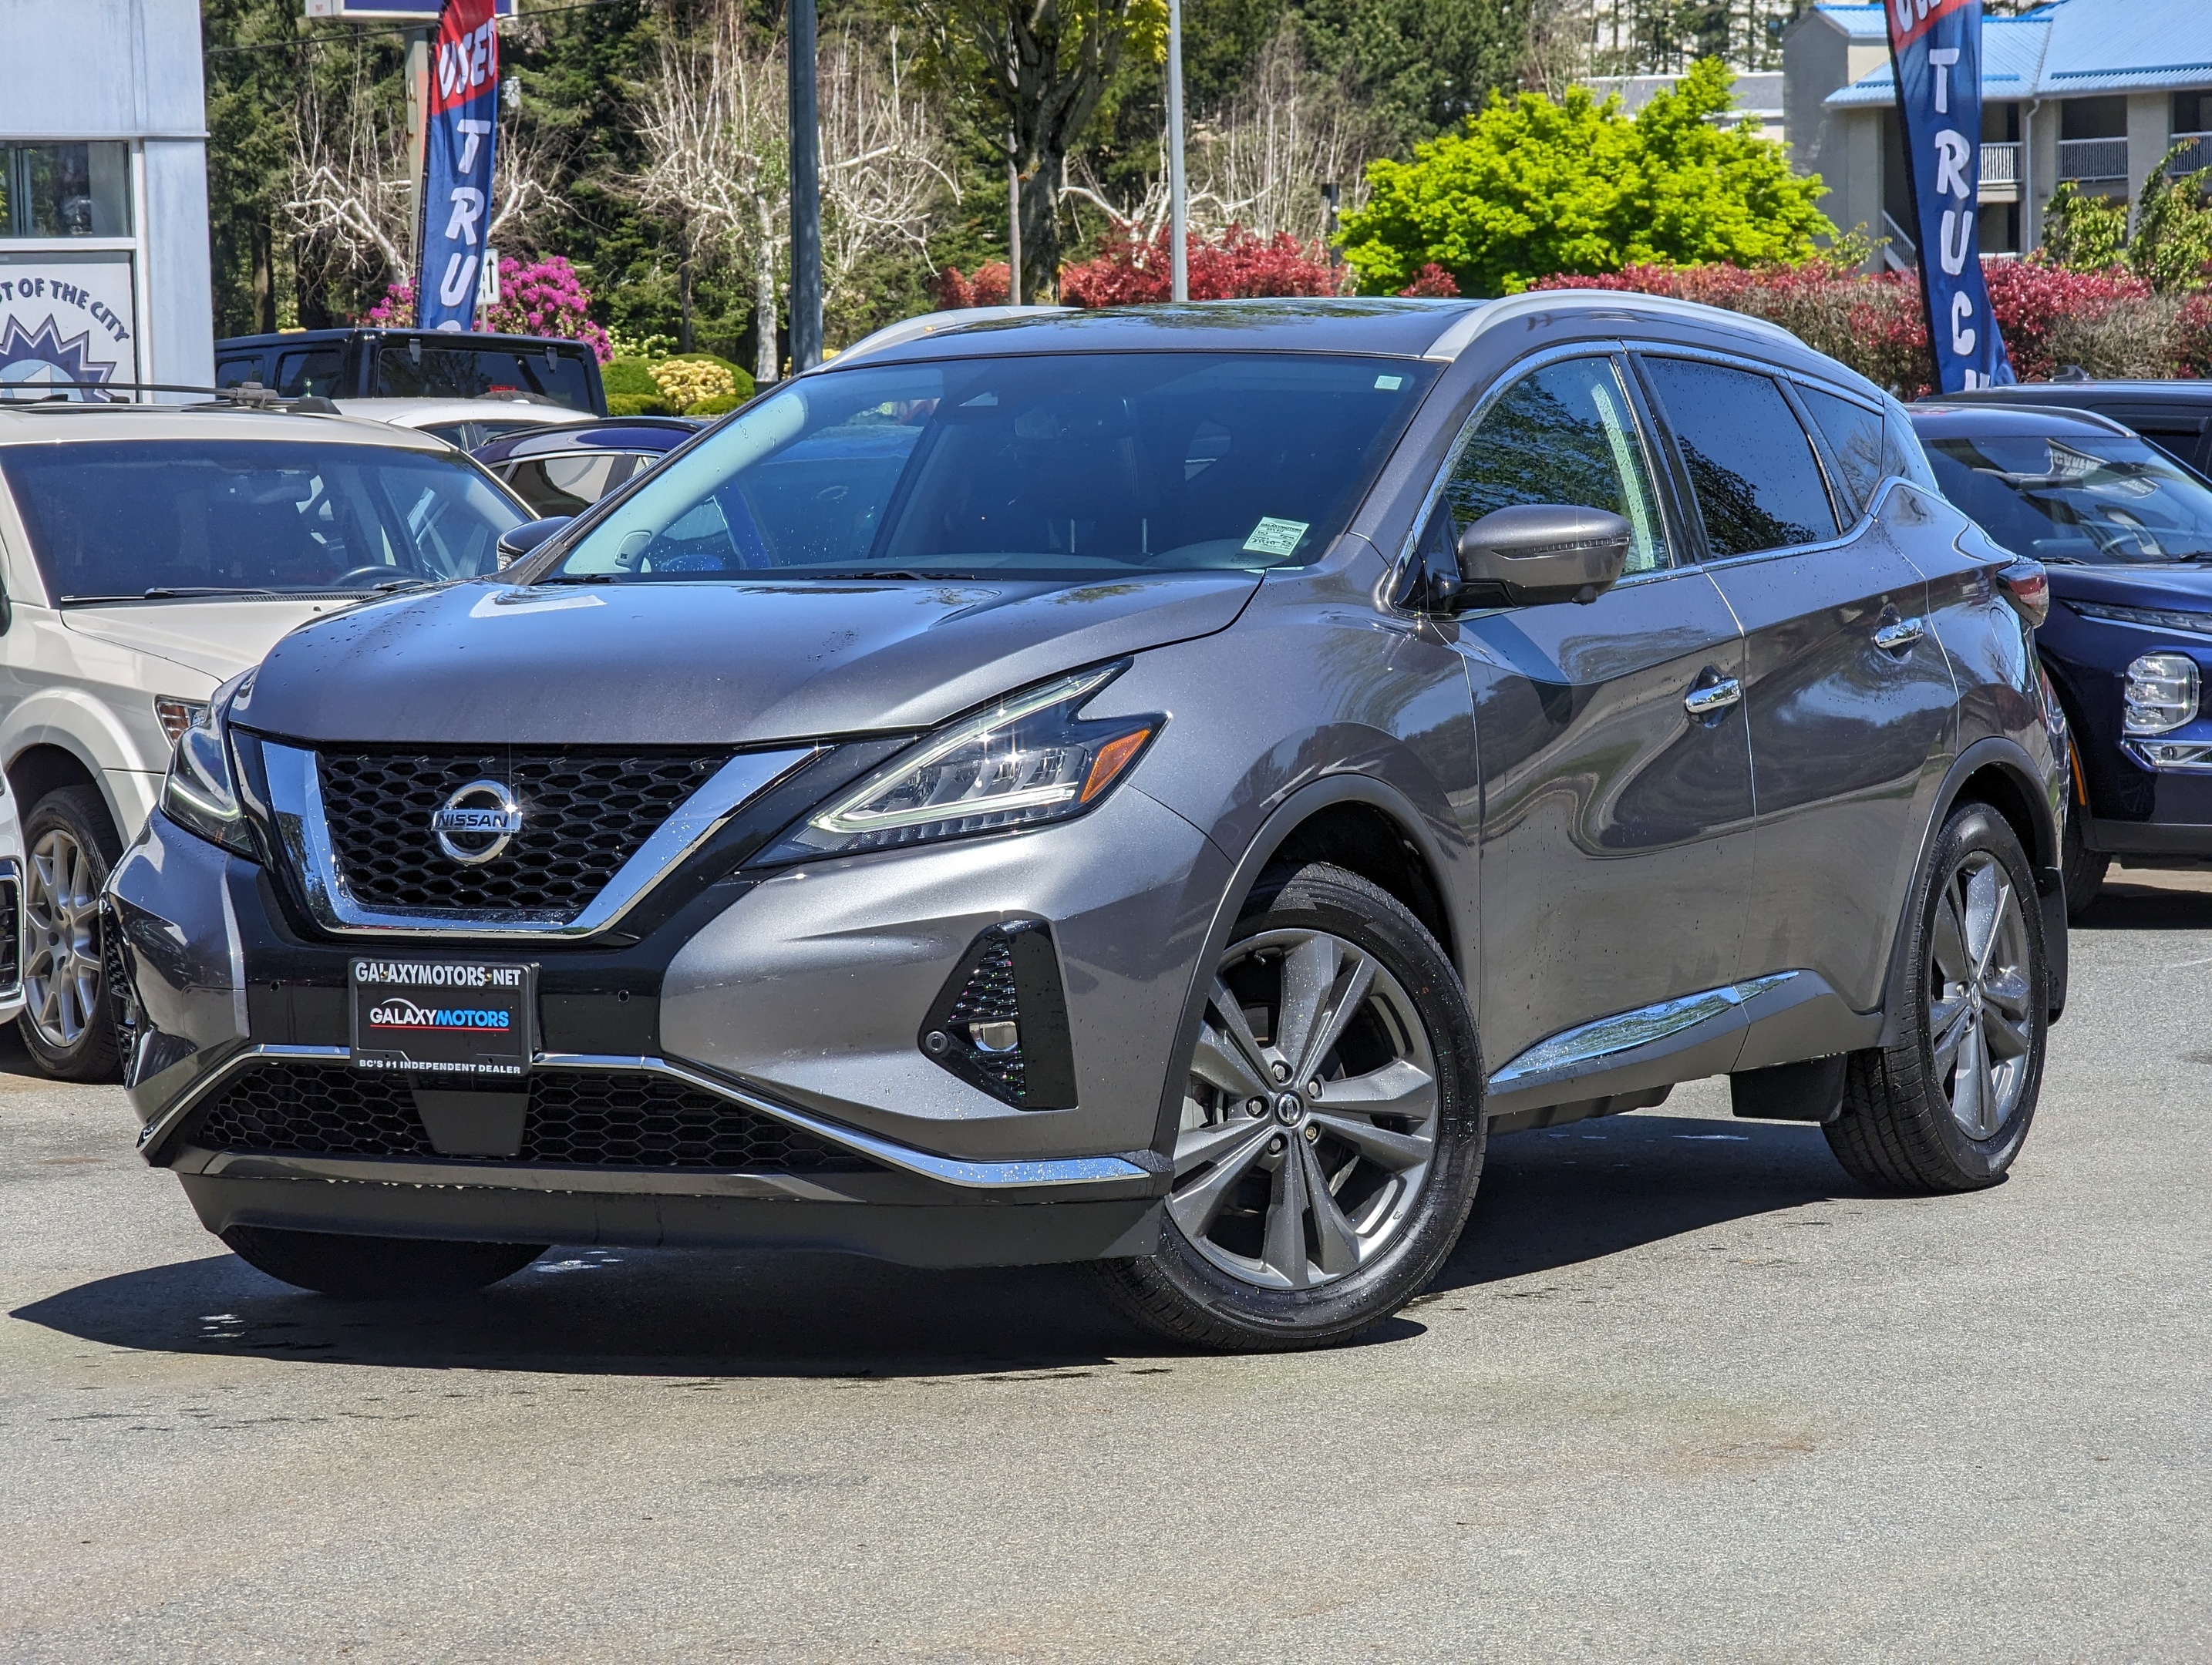 2019 Nissan Murano SV - No Accidents, NAV, Leather, AWD